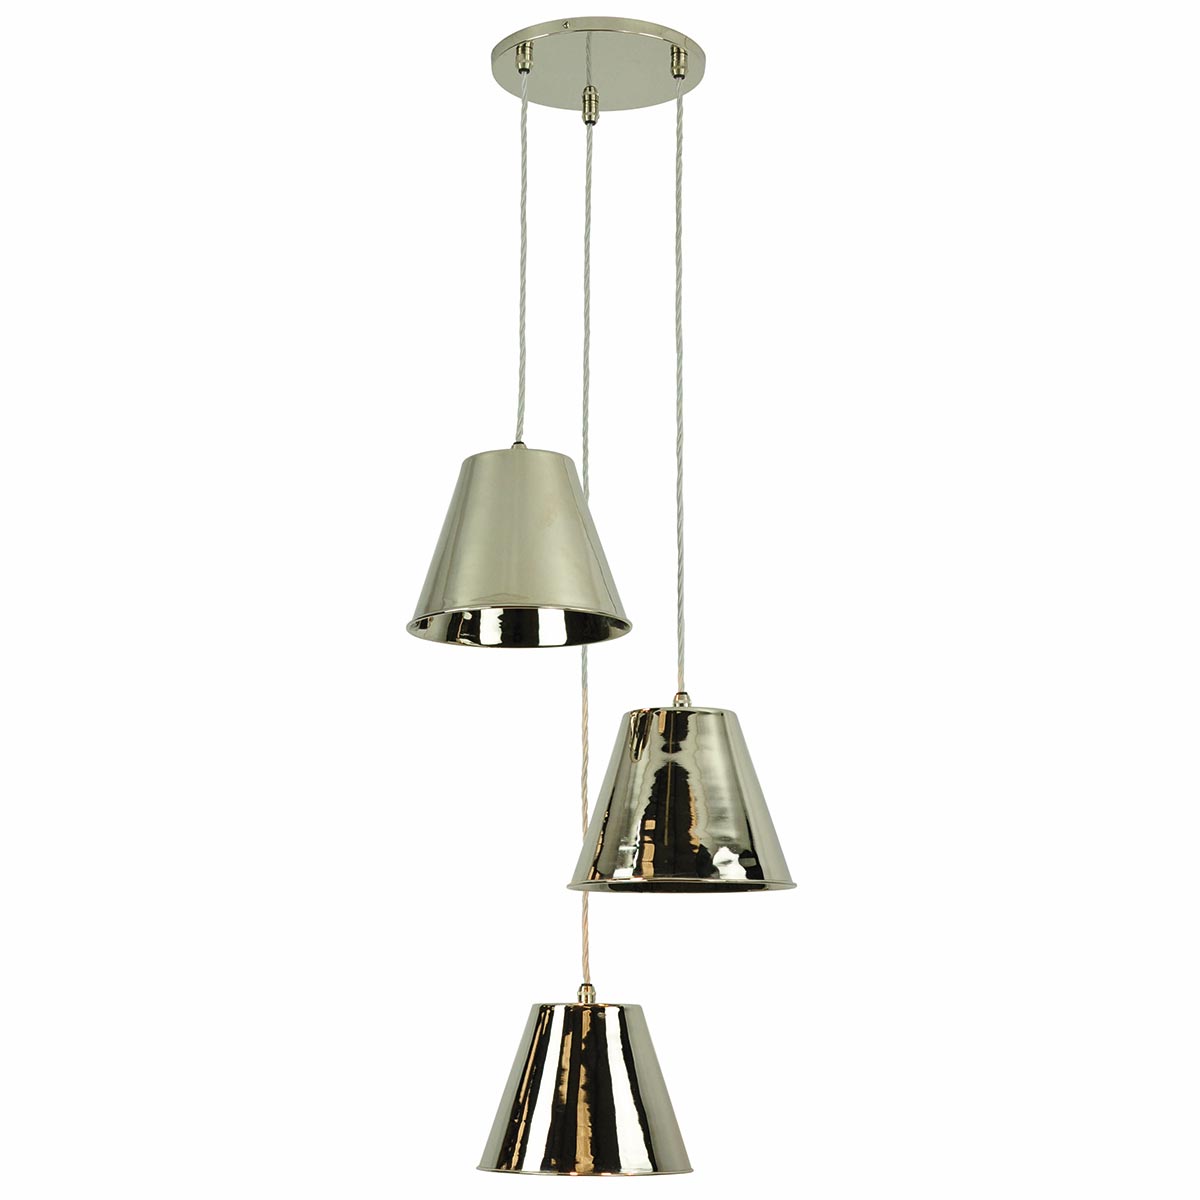 Map Room Nautical Style 3 Light Cluster Pendant Polished Nickel